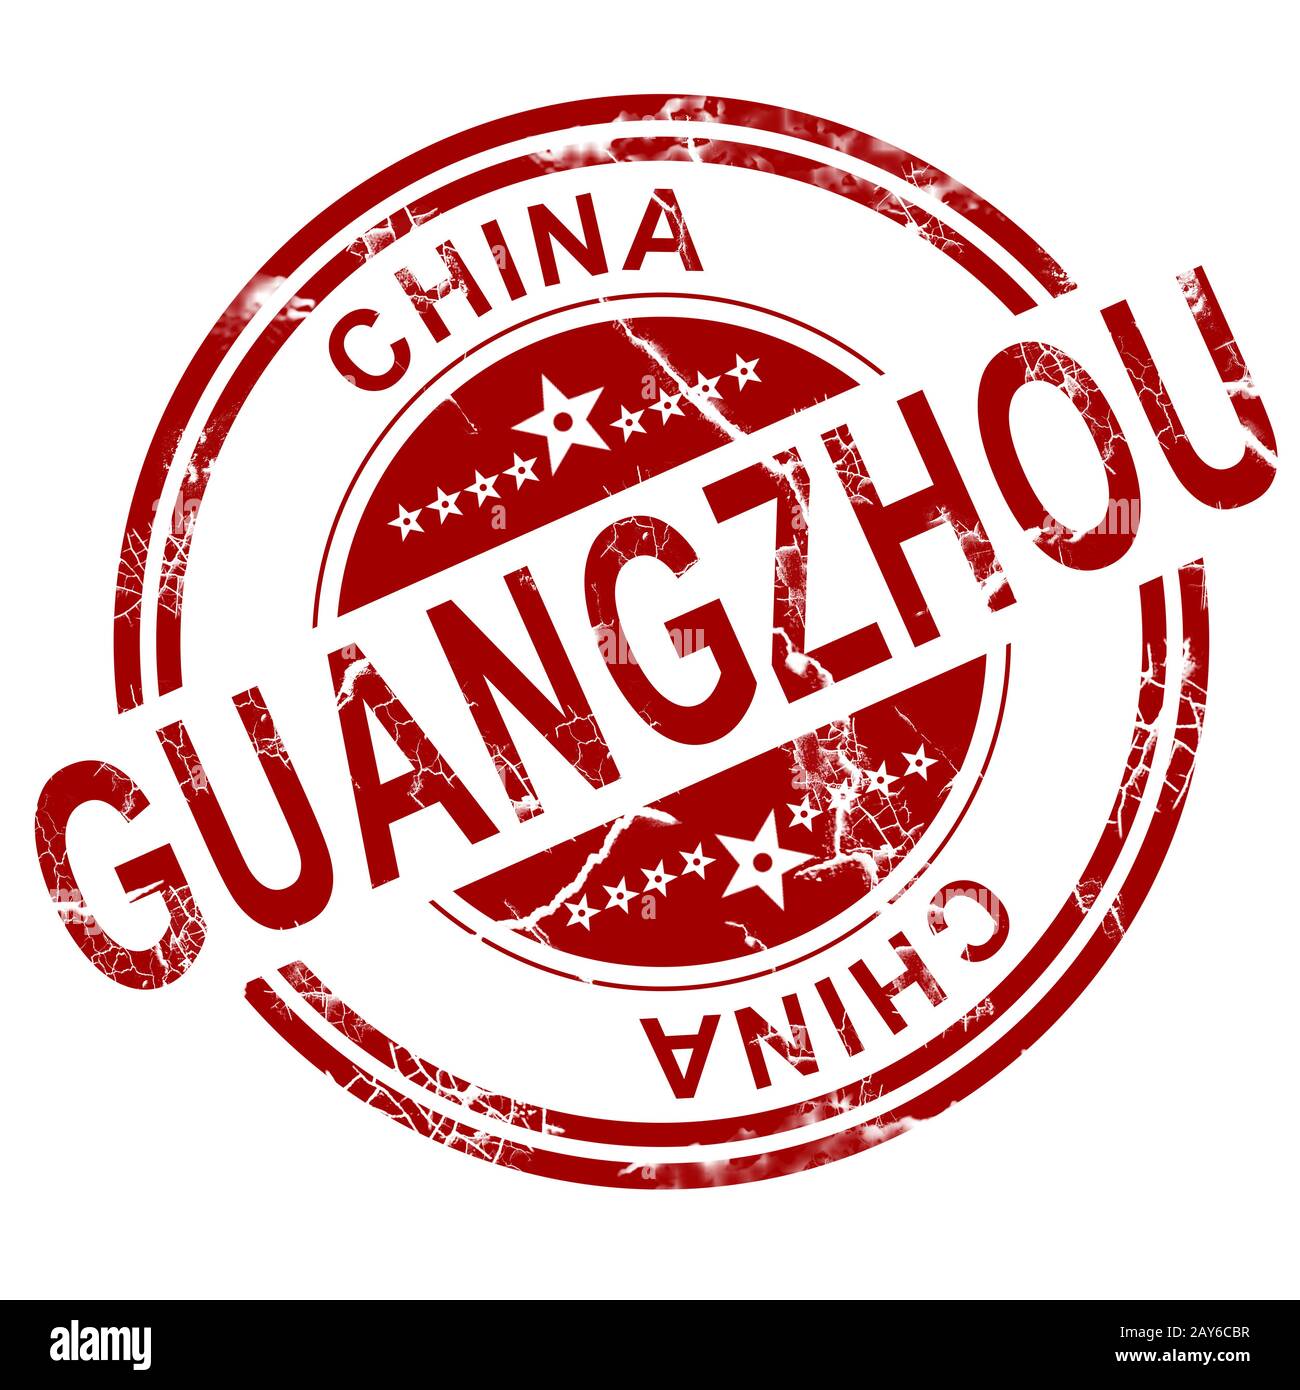 Guangzhou rouge stamp Banque D'Images